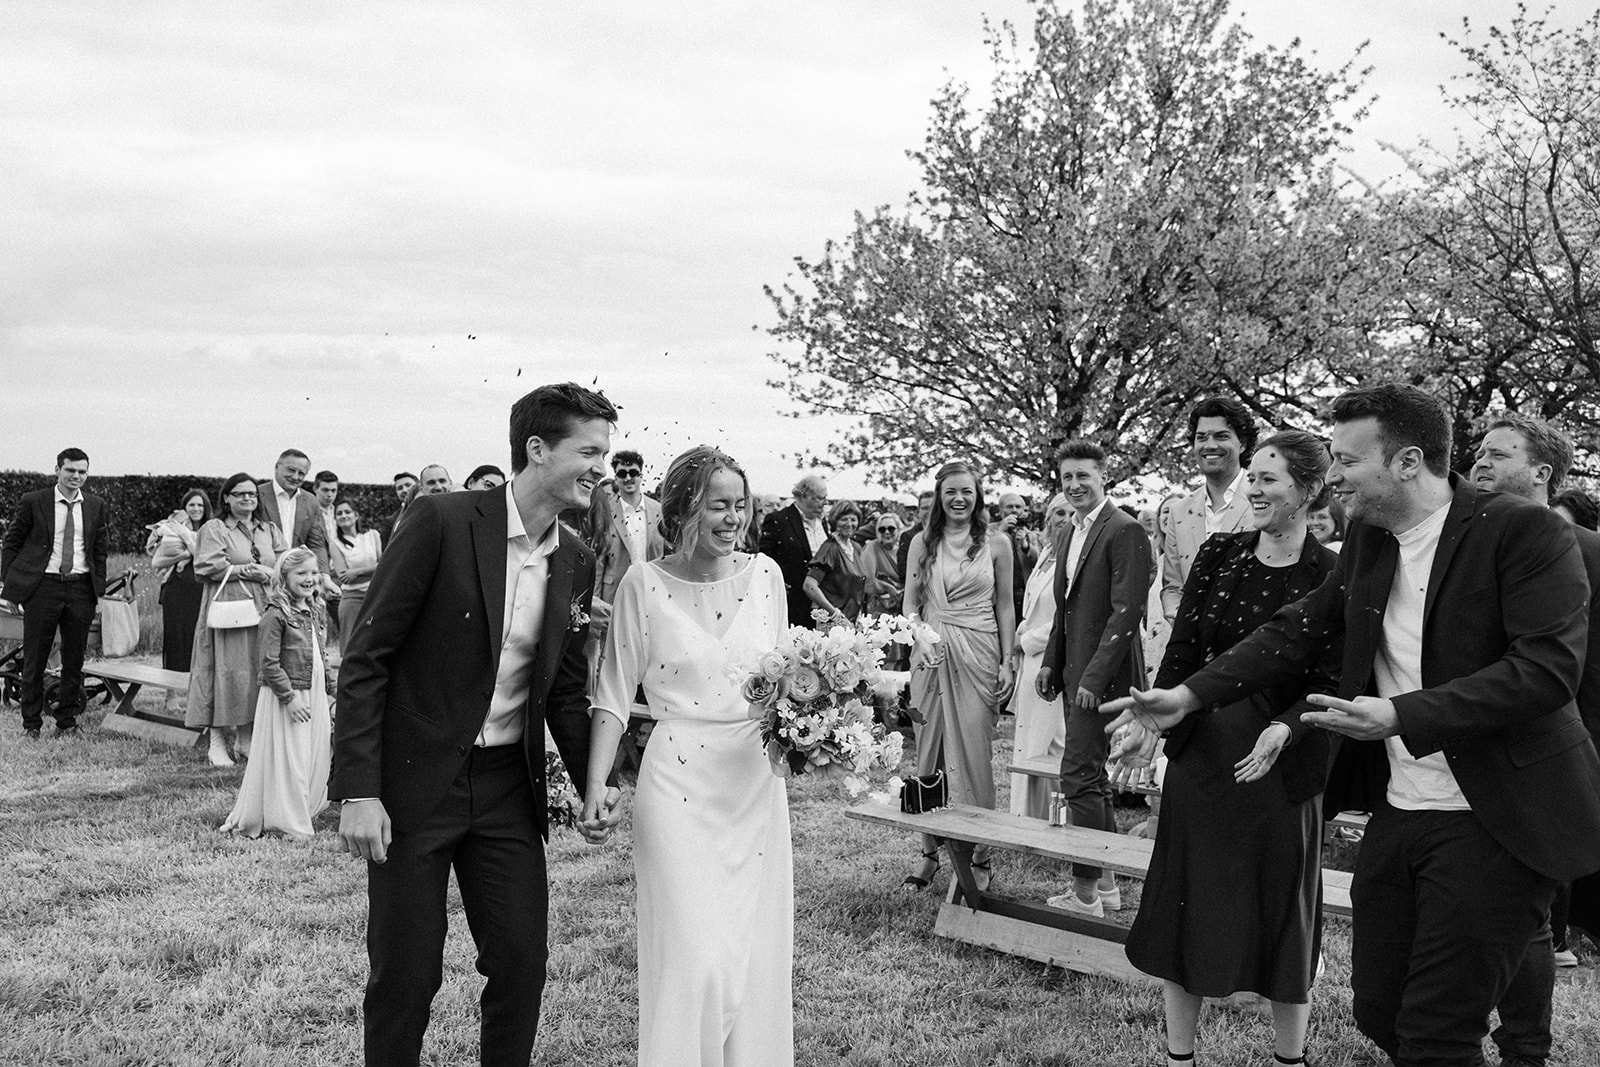 Couple's joyful exit as newlyweds, surrounded by family and friends